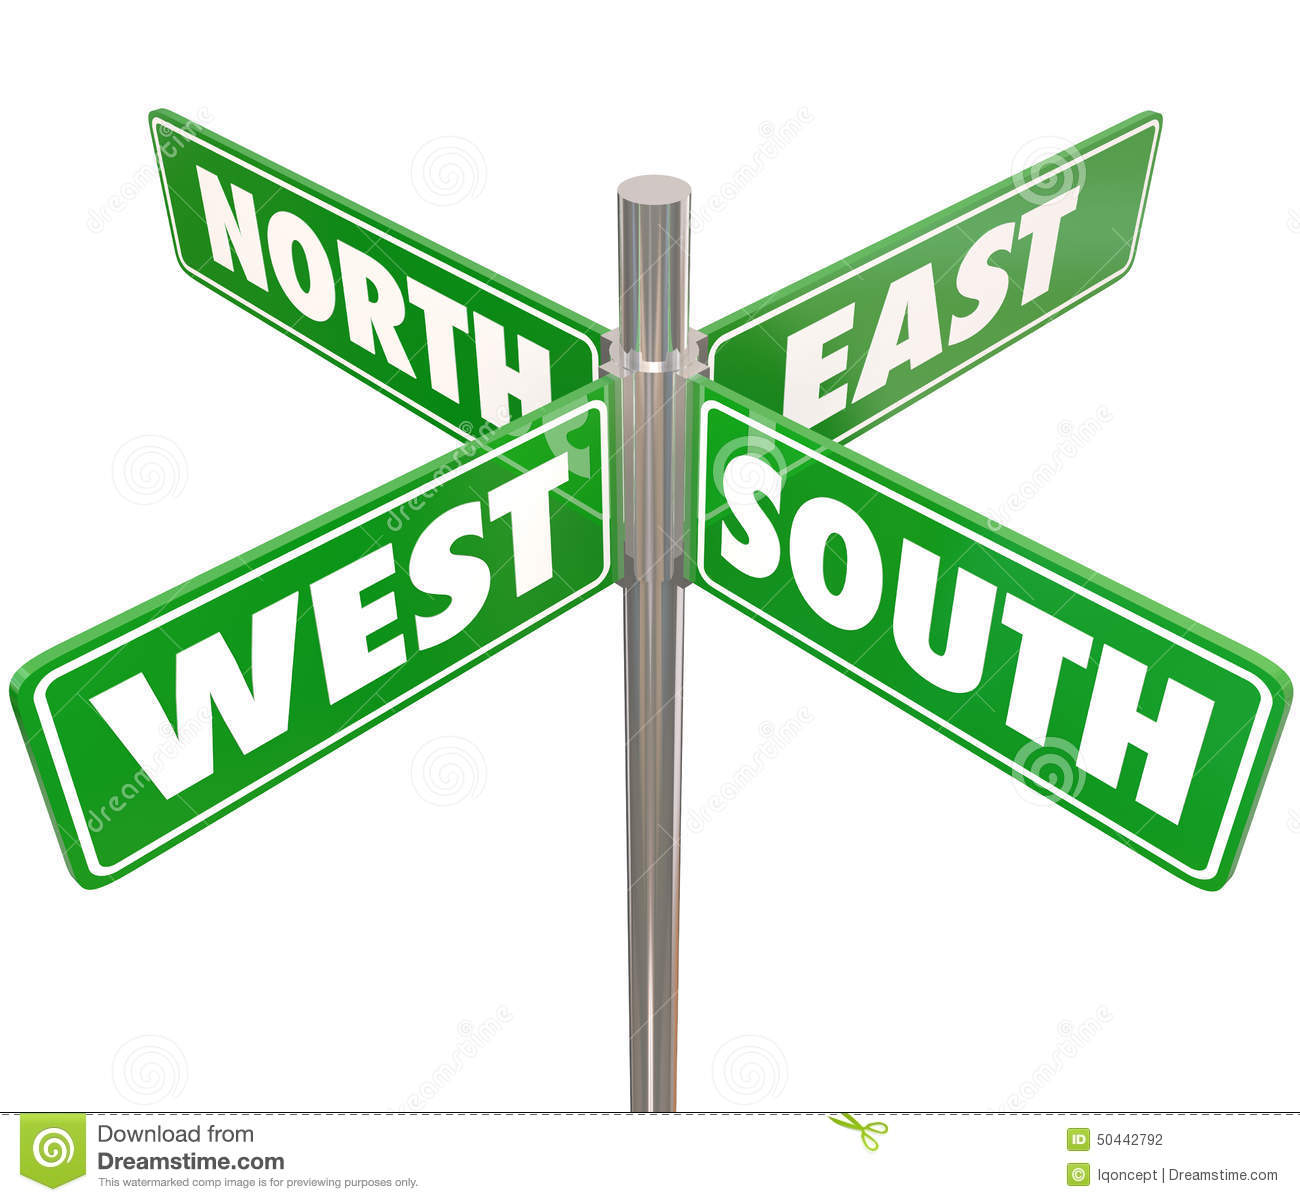 north-south-east-west-way-green-road-signs-intersection-four-street-marked-to-illustrate-point-travel-to-50442792